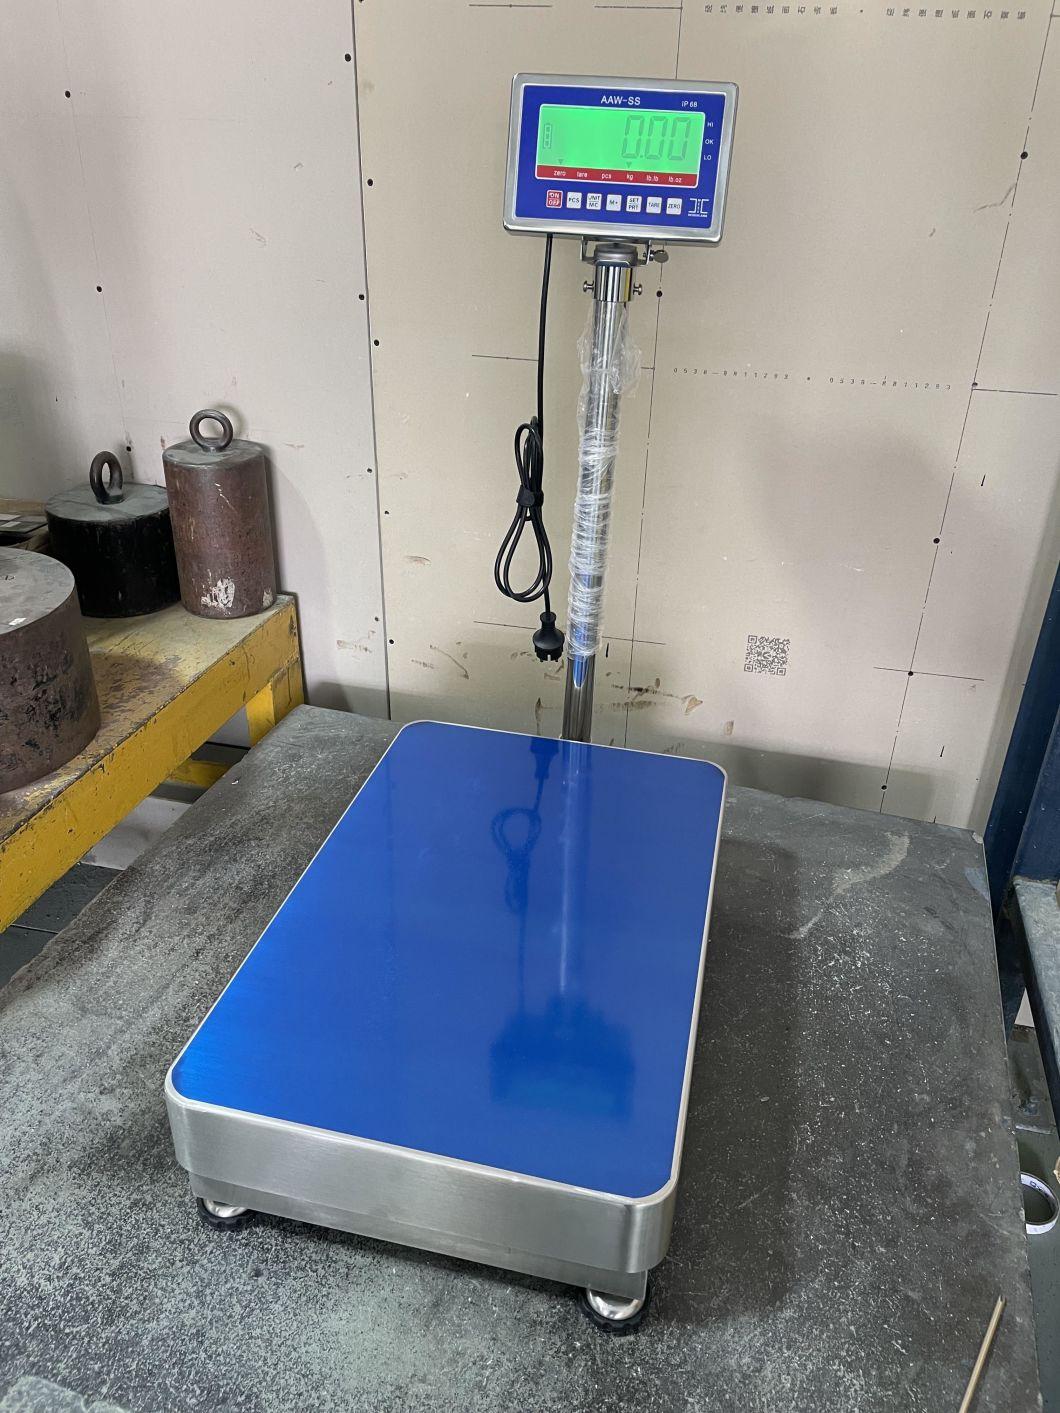 Platform Scale Stainless Steel Construction Size 38*38cm Capacity 60kg